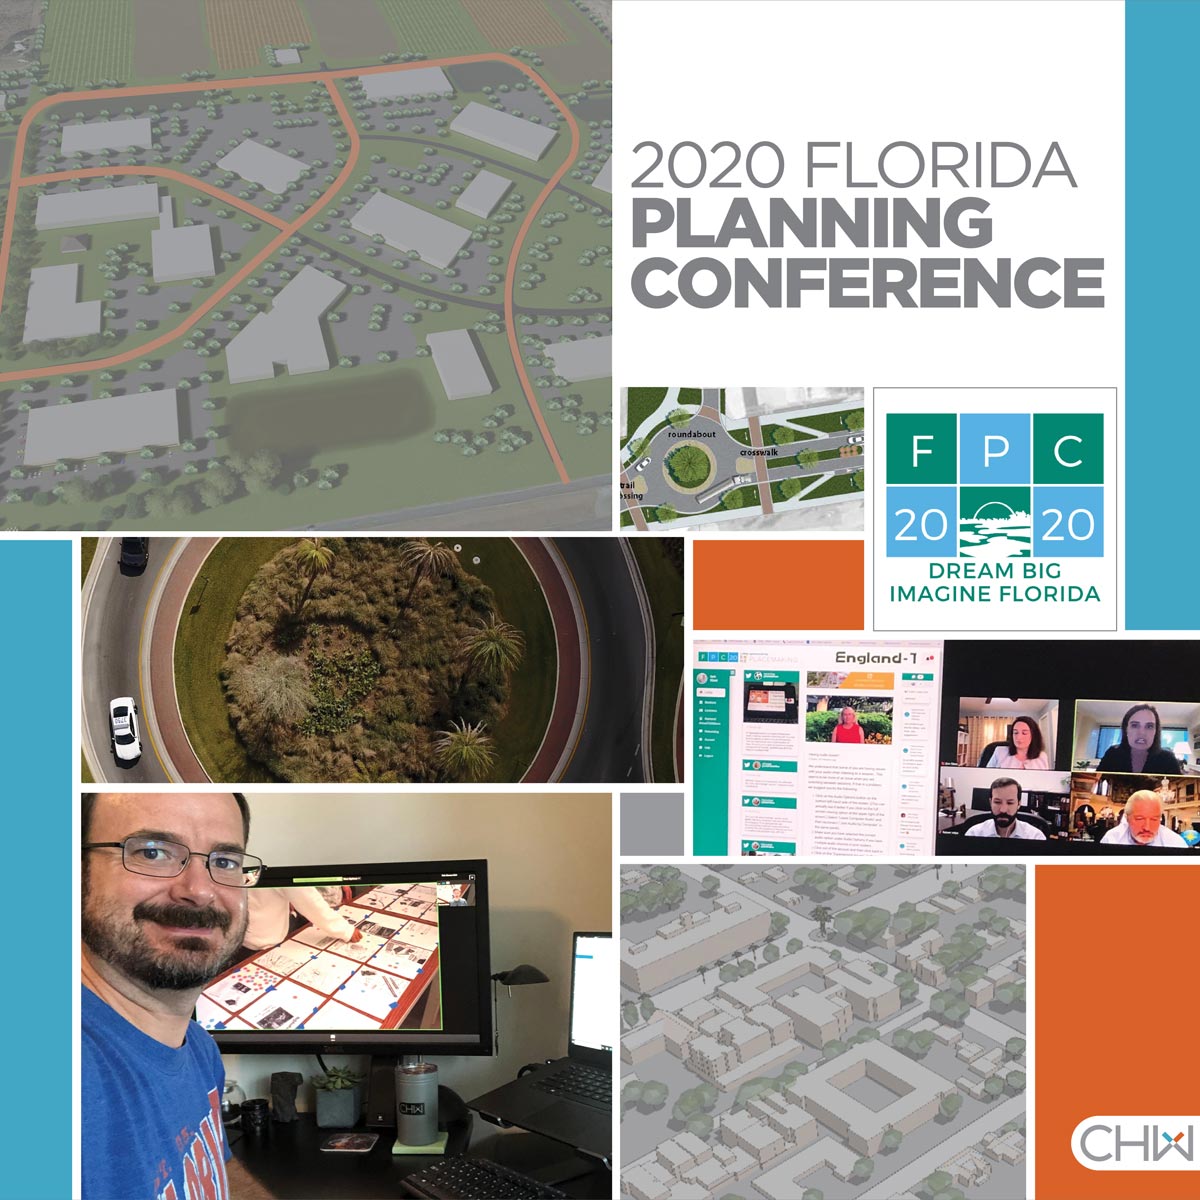 With a sharp mind, you can go far. CHW's Planning Team is honing their professional skills at the APA Florida 2020 Florida Planning Conference.